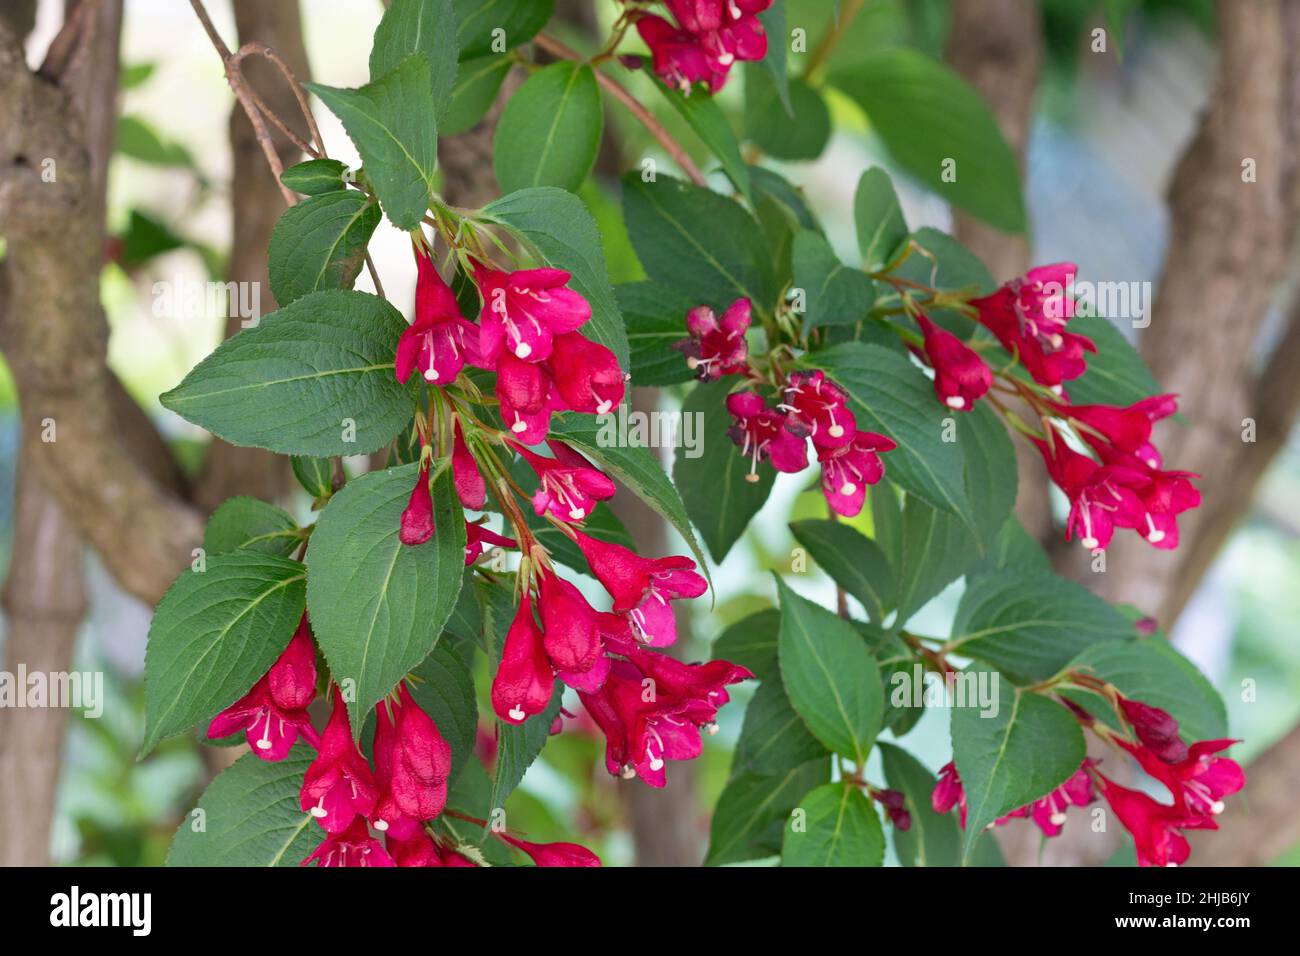 Weigela shrub with blooming red flowers on branches Stock Photo